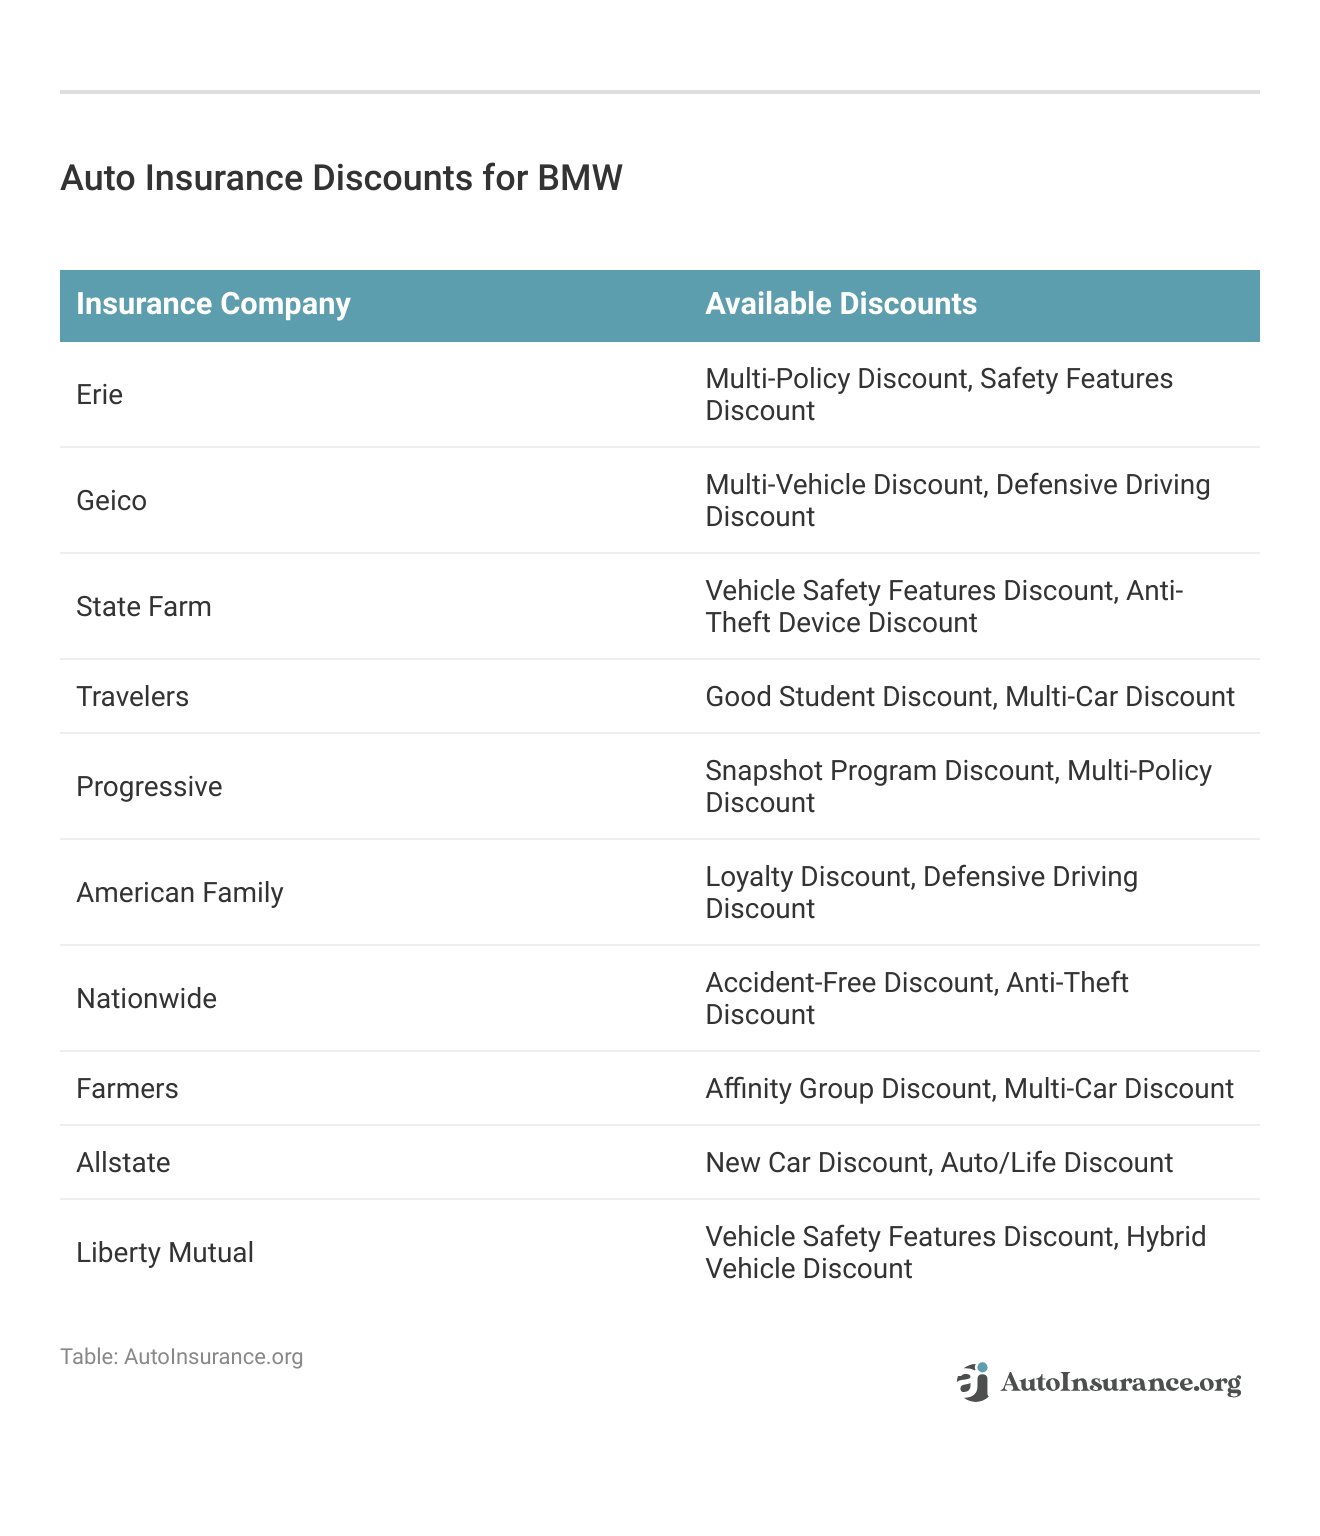 <h3>Auto Insurance Discounts for BMW</h3>